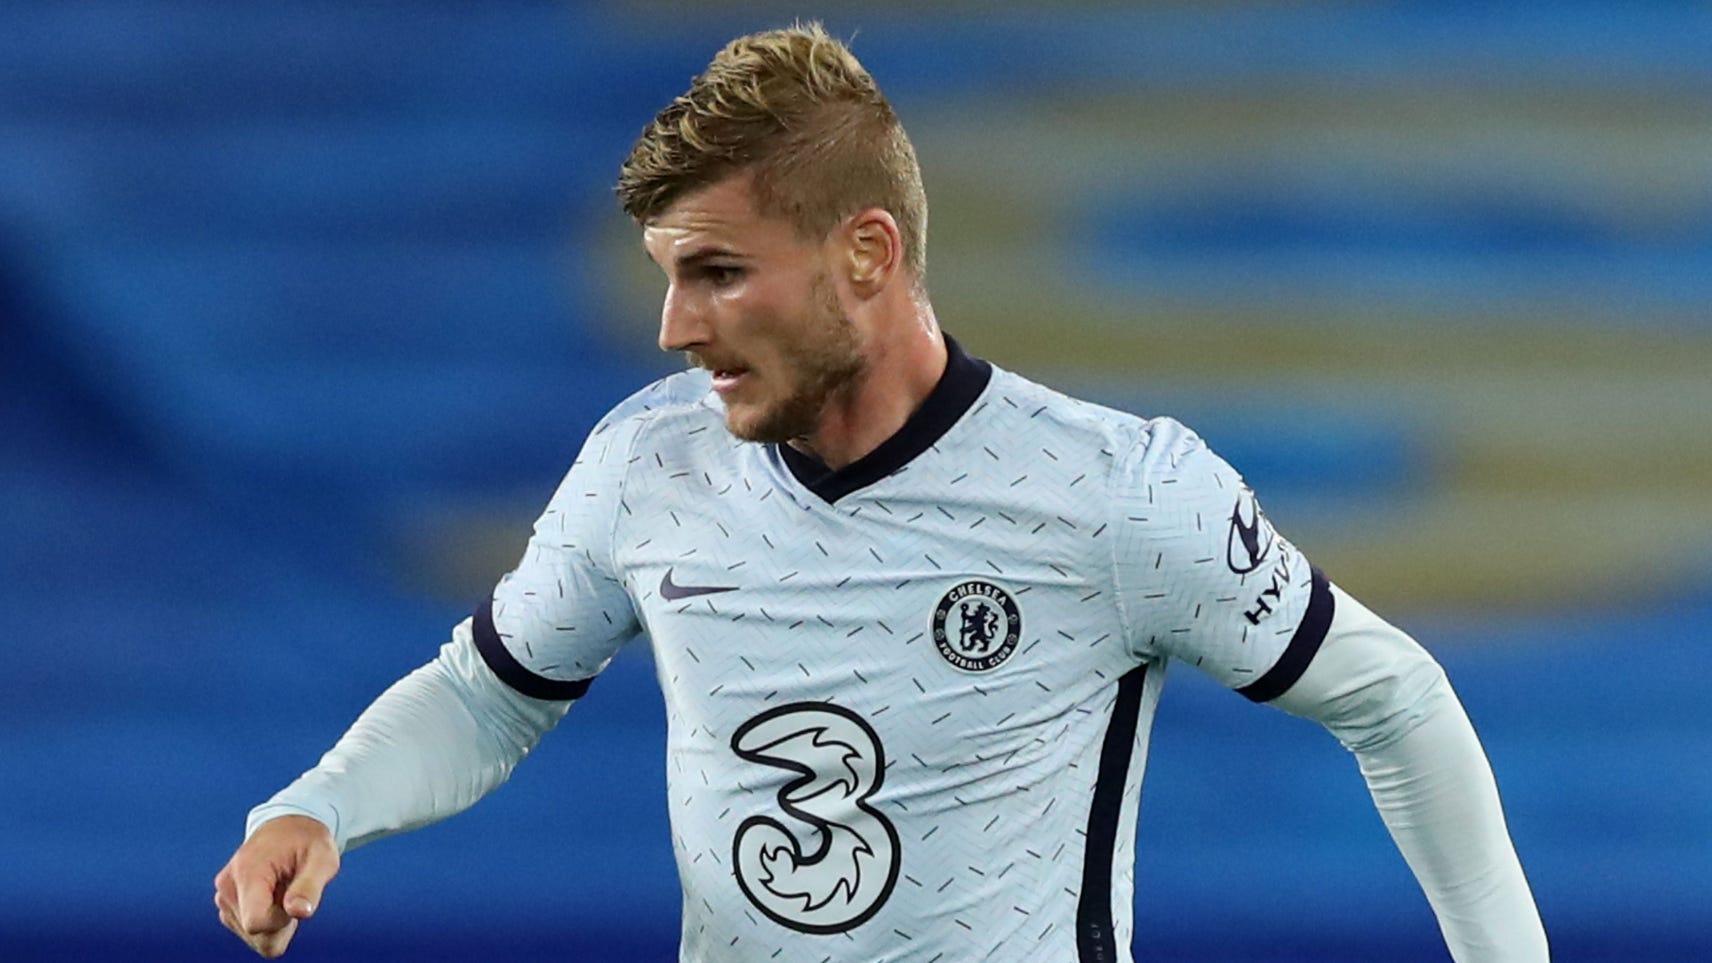 Timo Werner Chelsea 2020-21